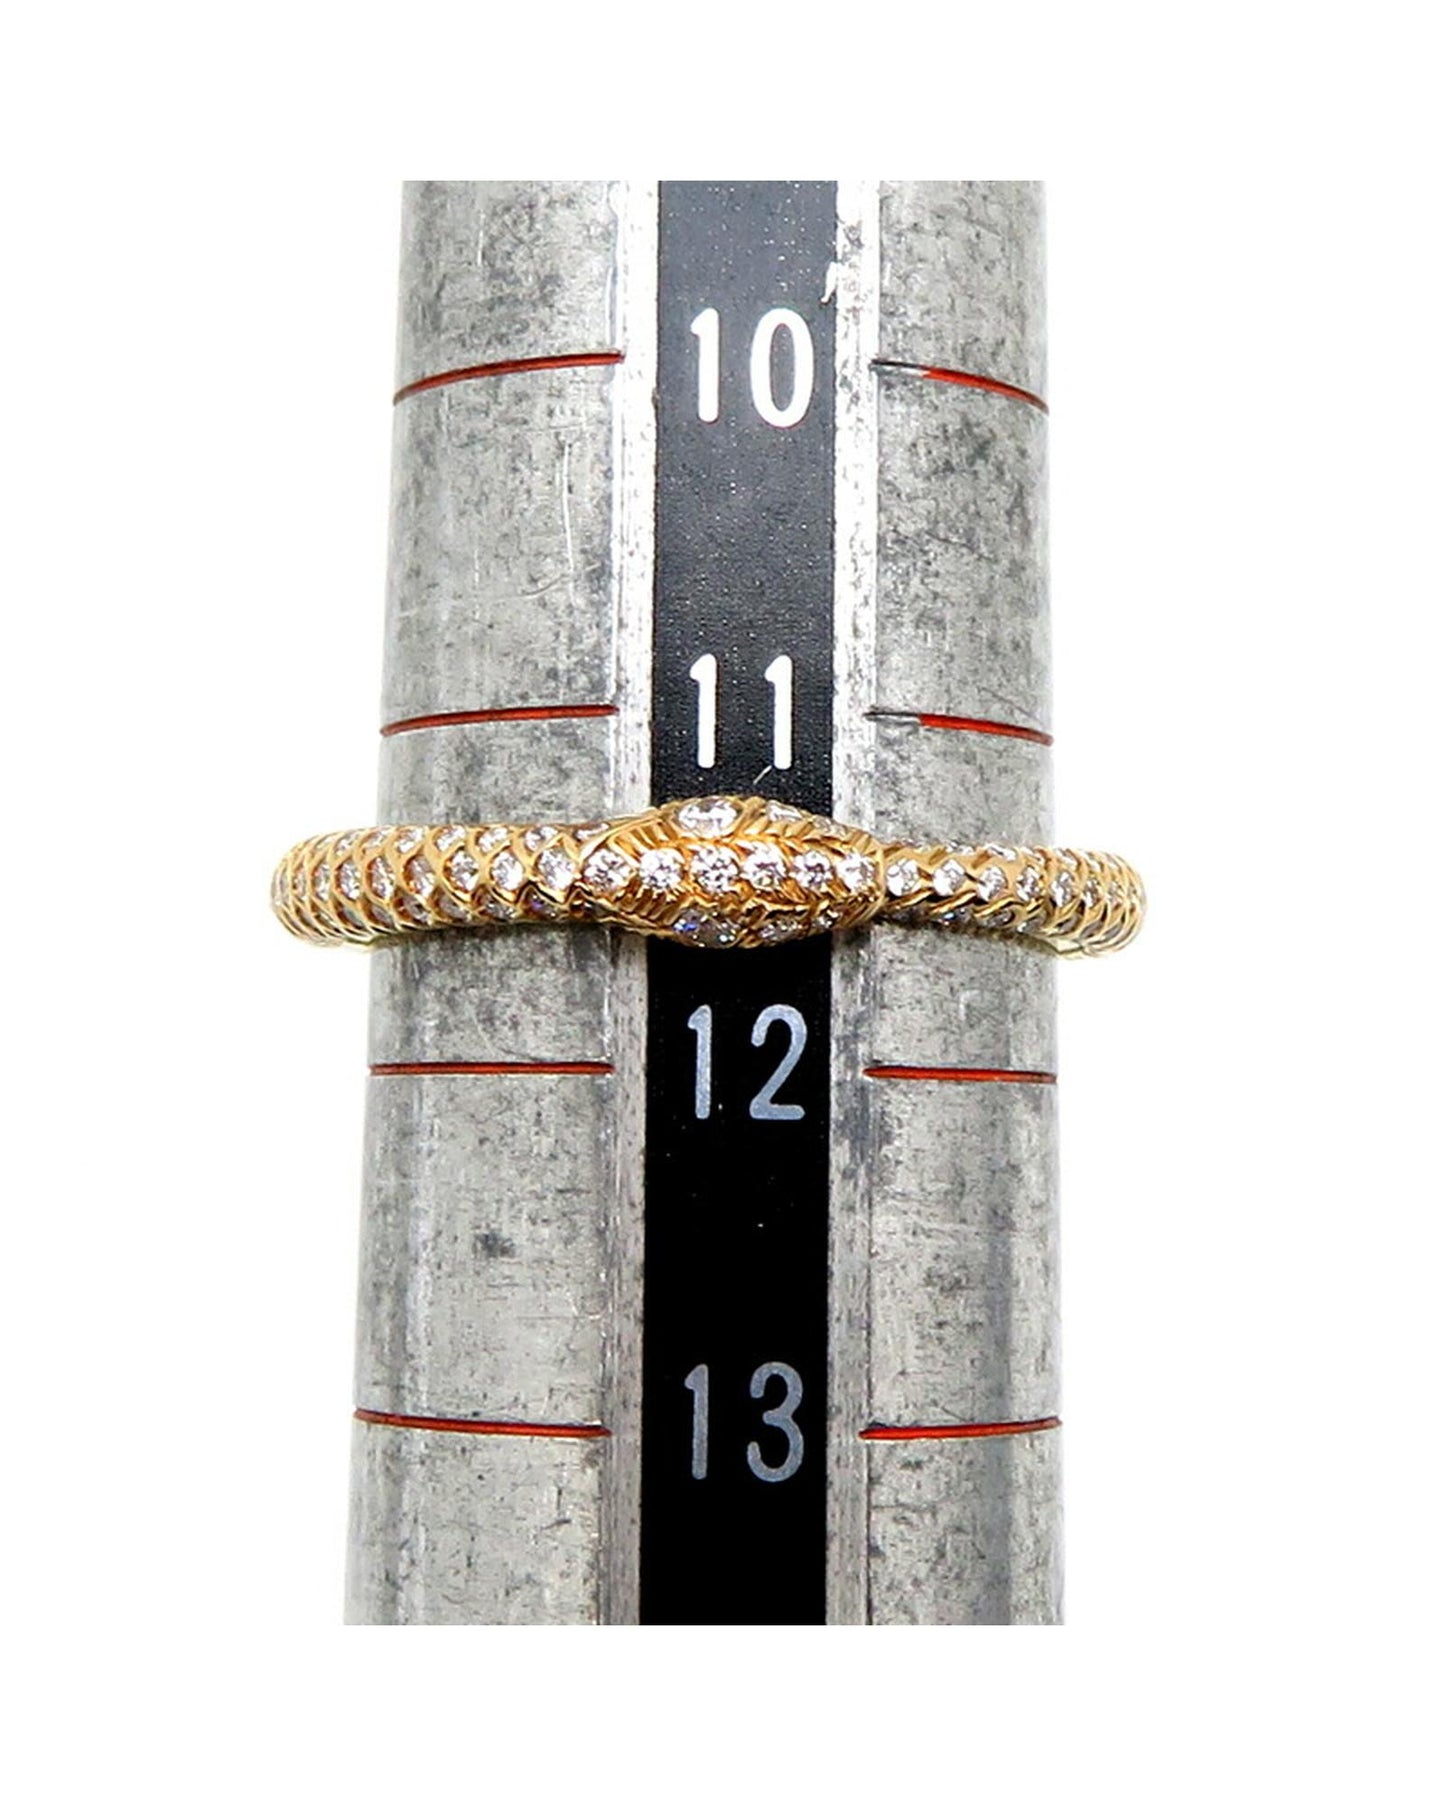 Gucci Women's Diamond Pave Snake Ring in Gold